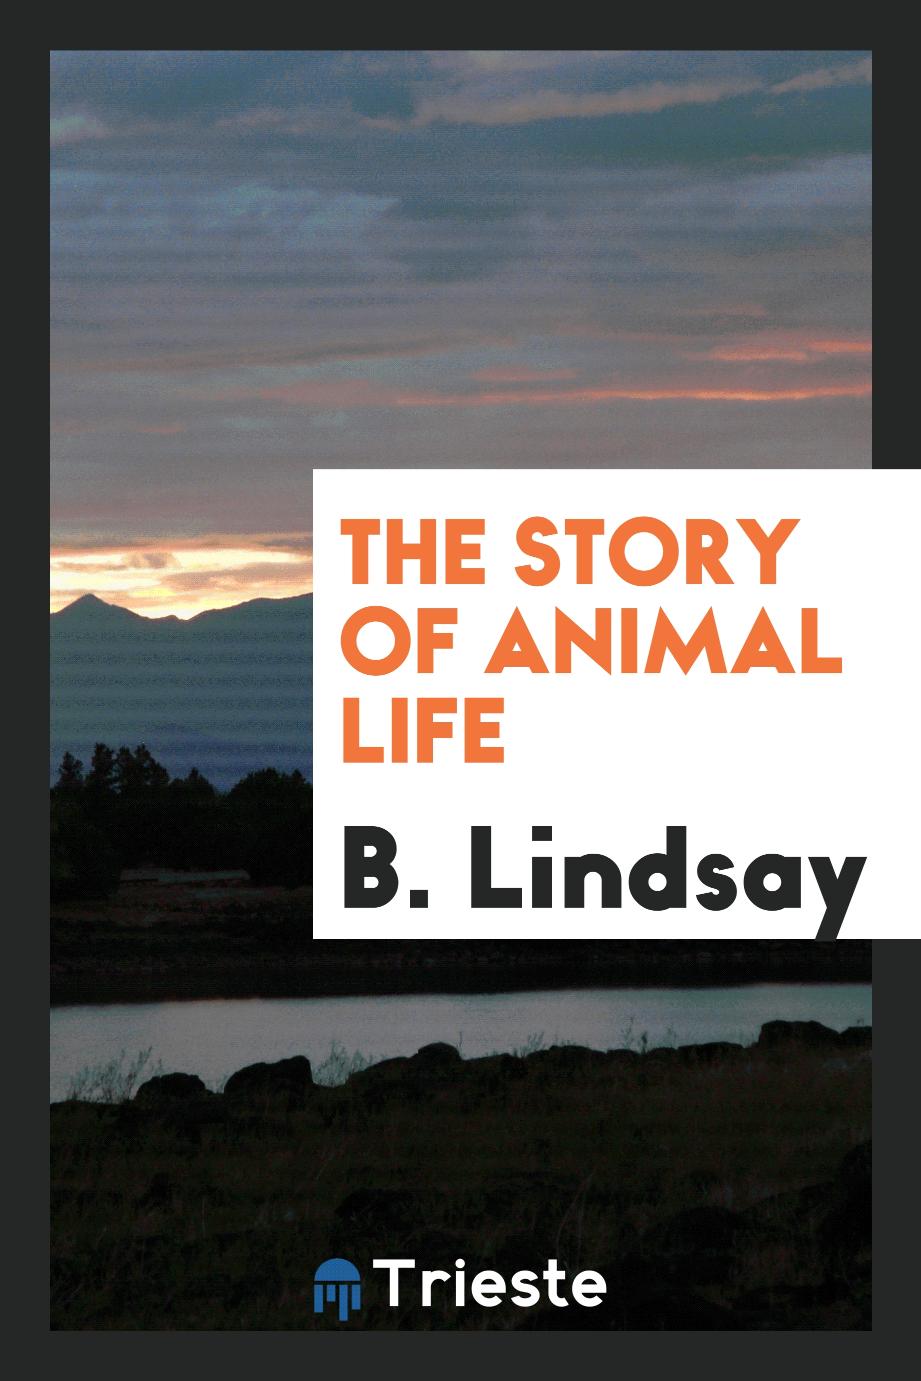 The Story of Animal Life